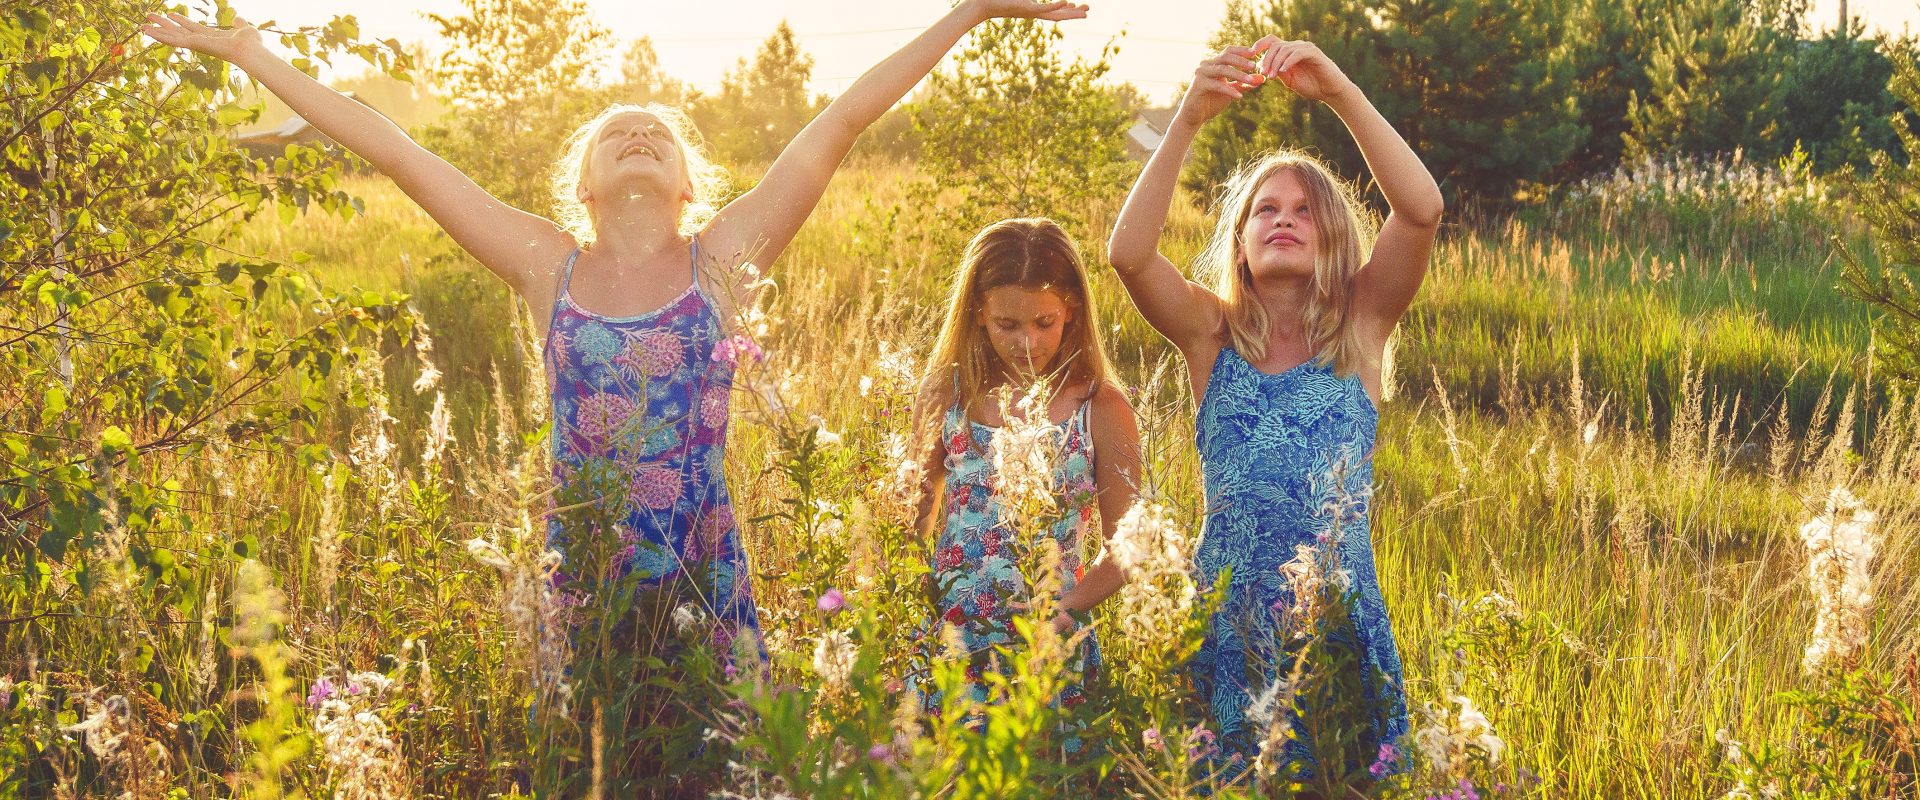 Sunshine & smiles: activities for the whole family to enjoy this summer